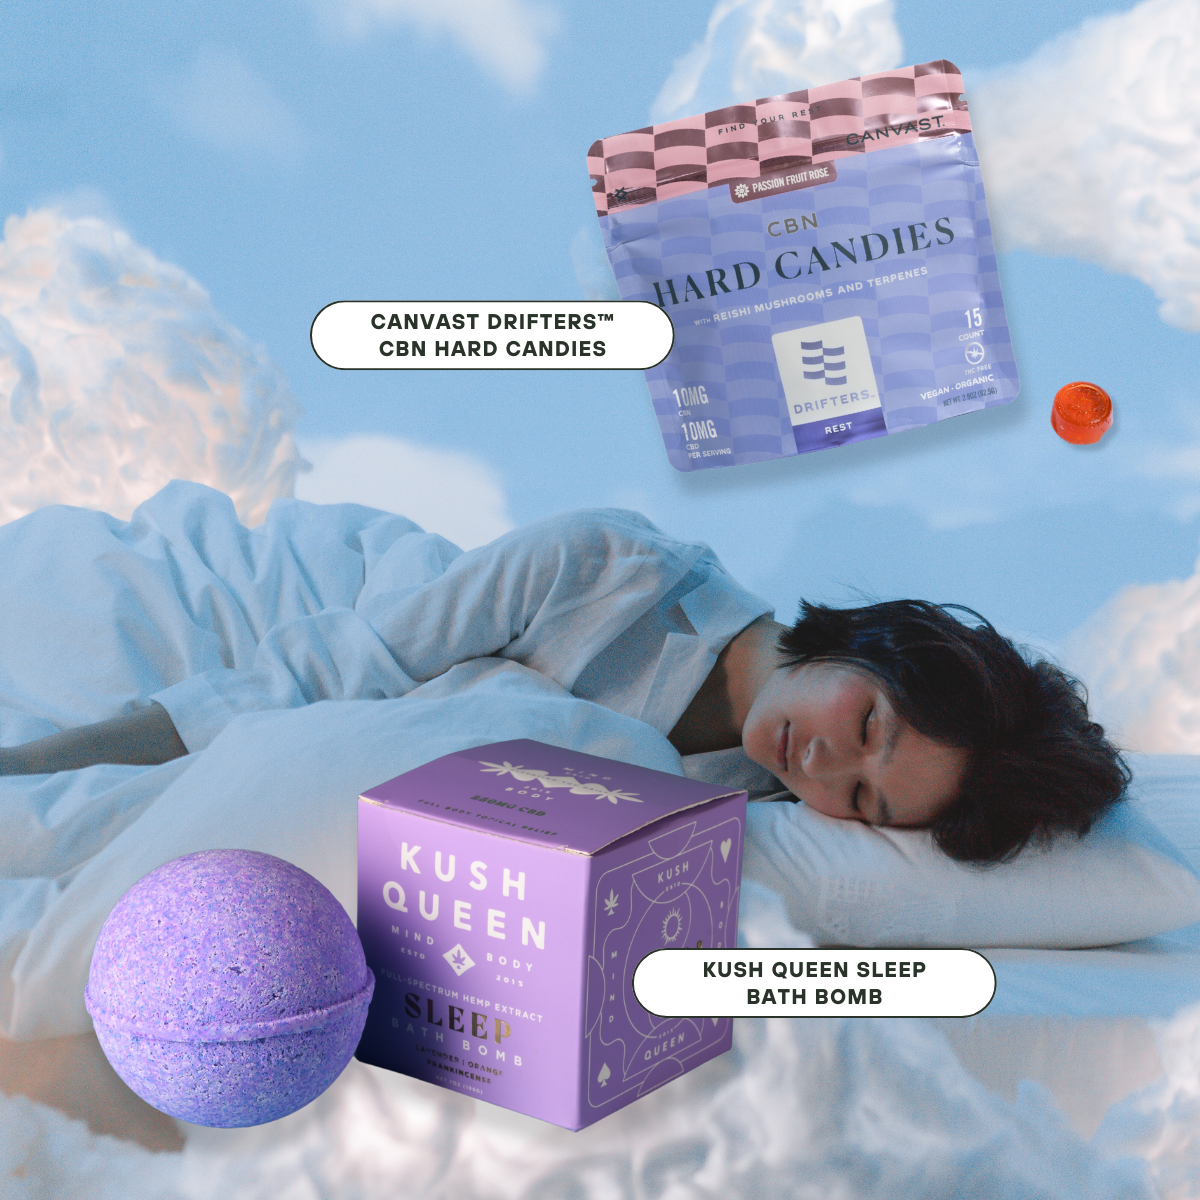 Restful Nights Bundle Offer including 1 Kush Queen Sleep Bath Bomb and 1 6-count bag of Canvast Drifters CBN Hard Candies. Priced at $44.